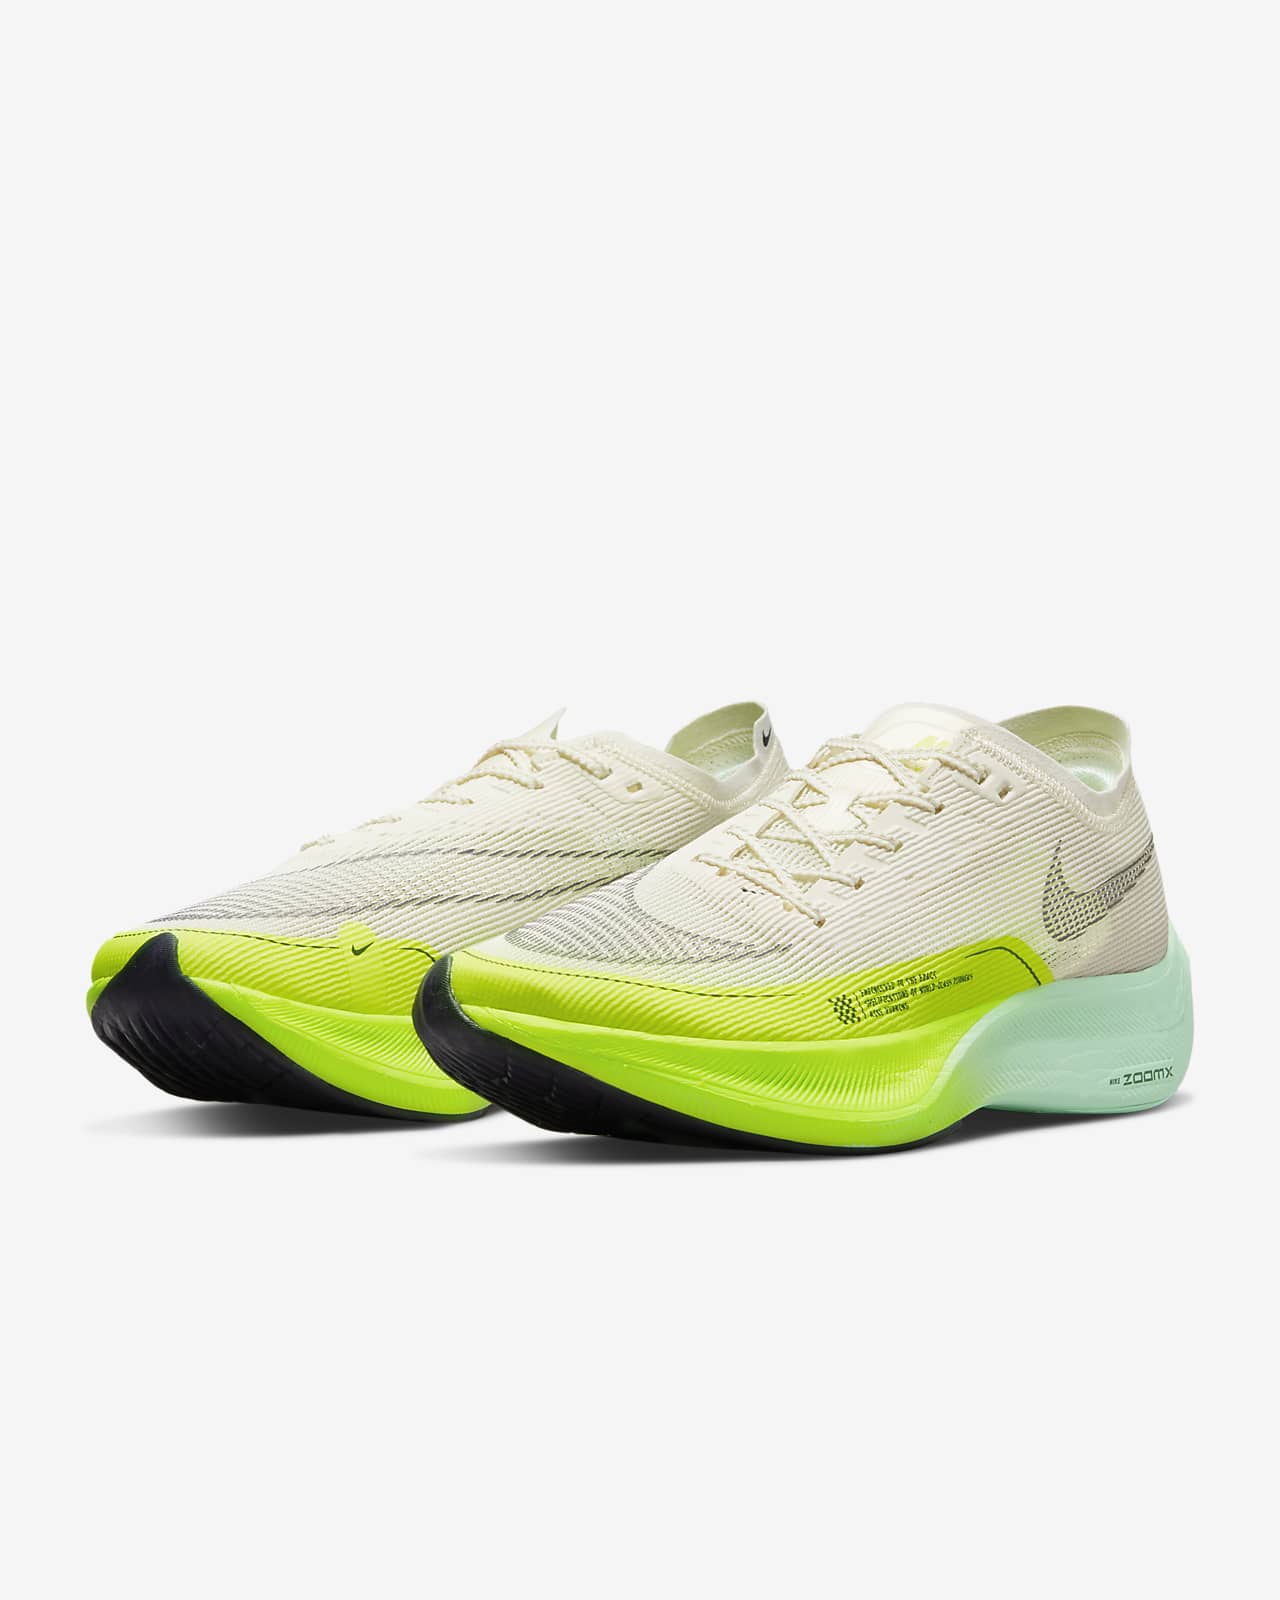 Nike ZoomX Vaporfly NEXT% 2 Men's Road Racing Shoes